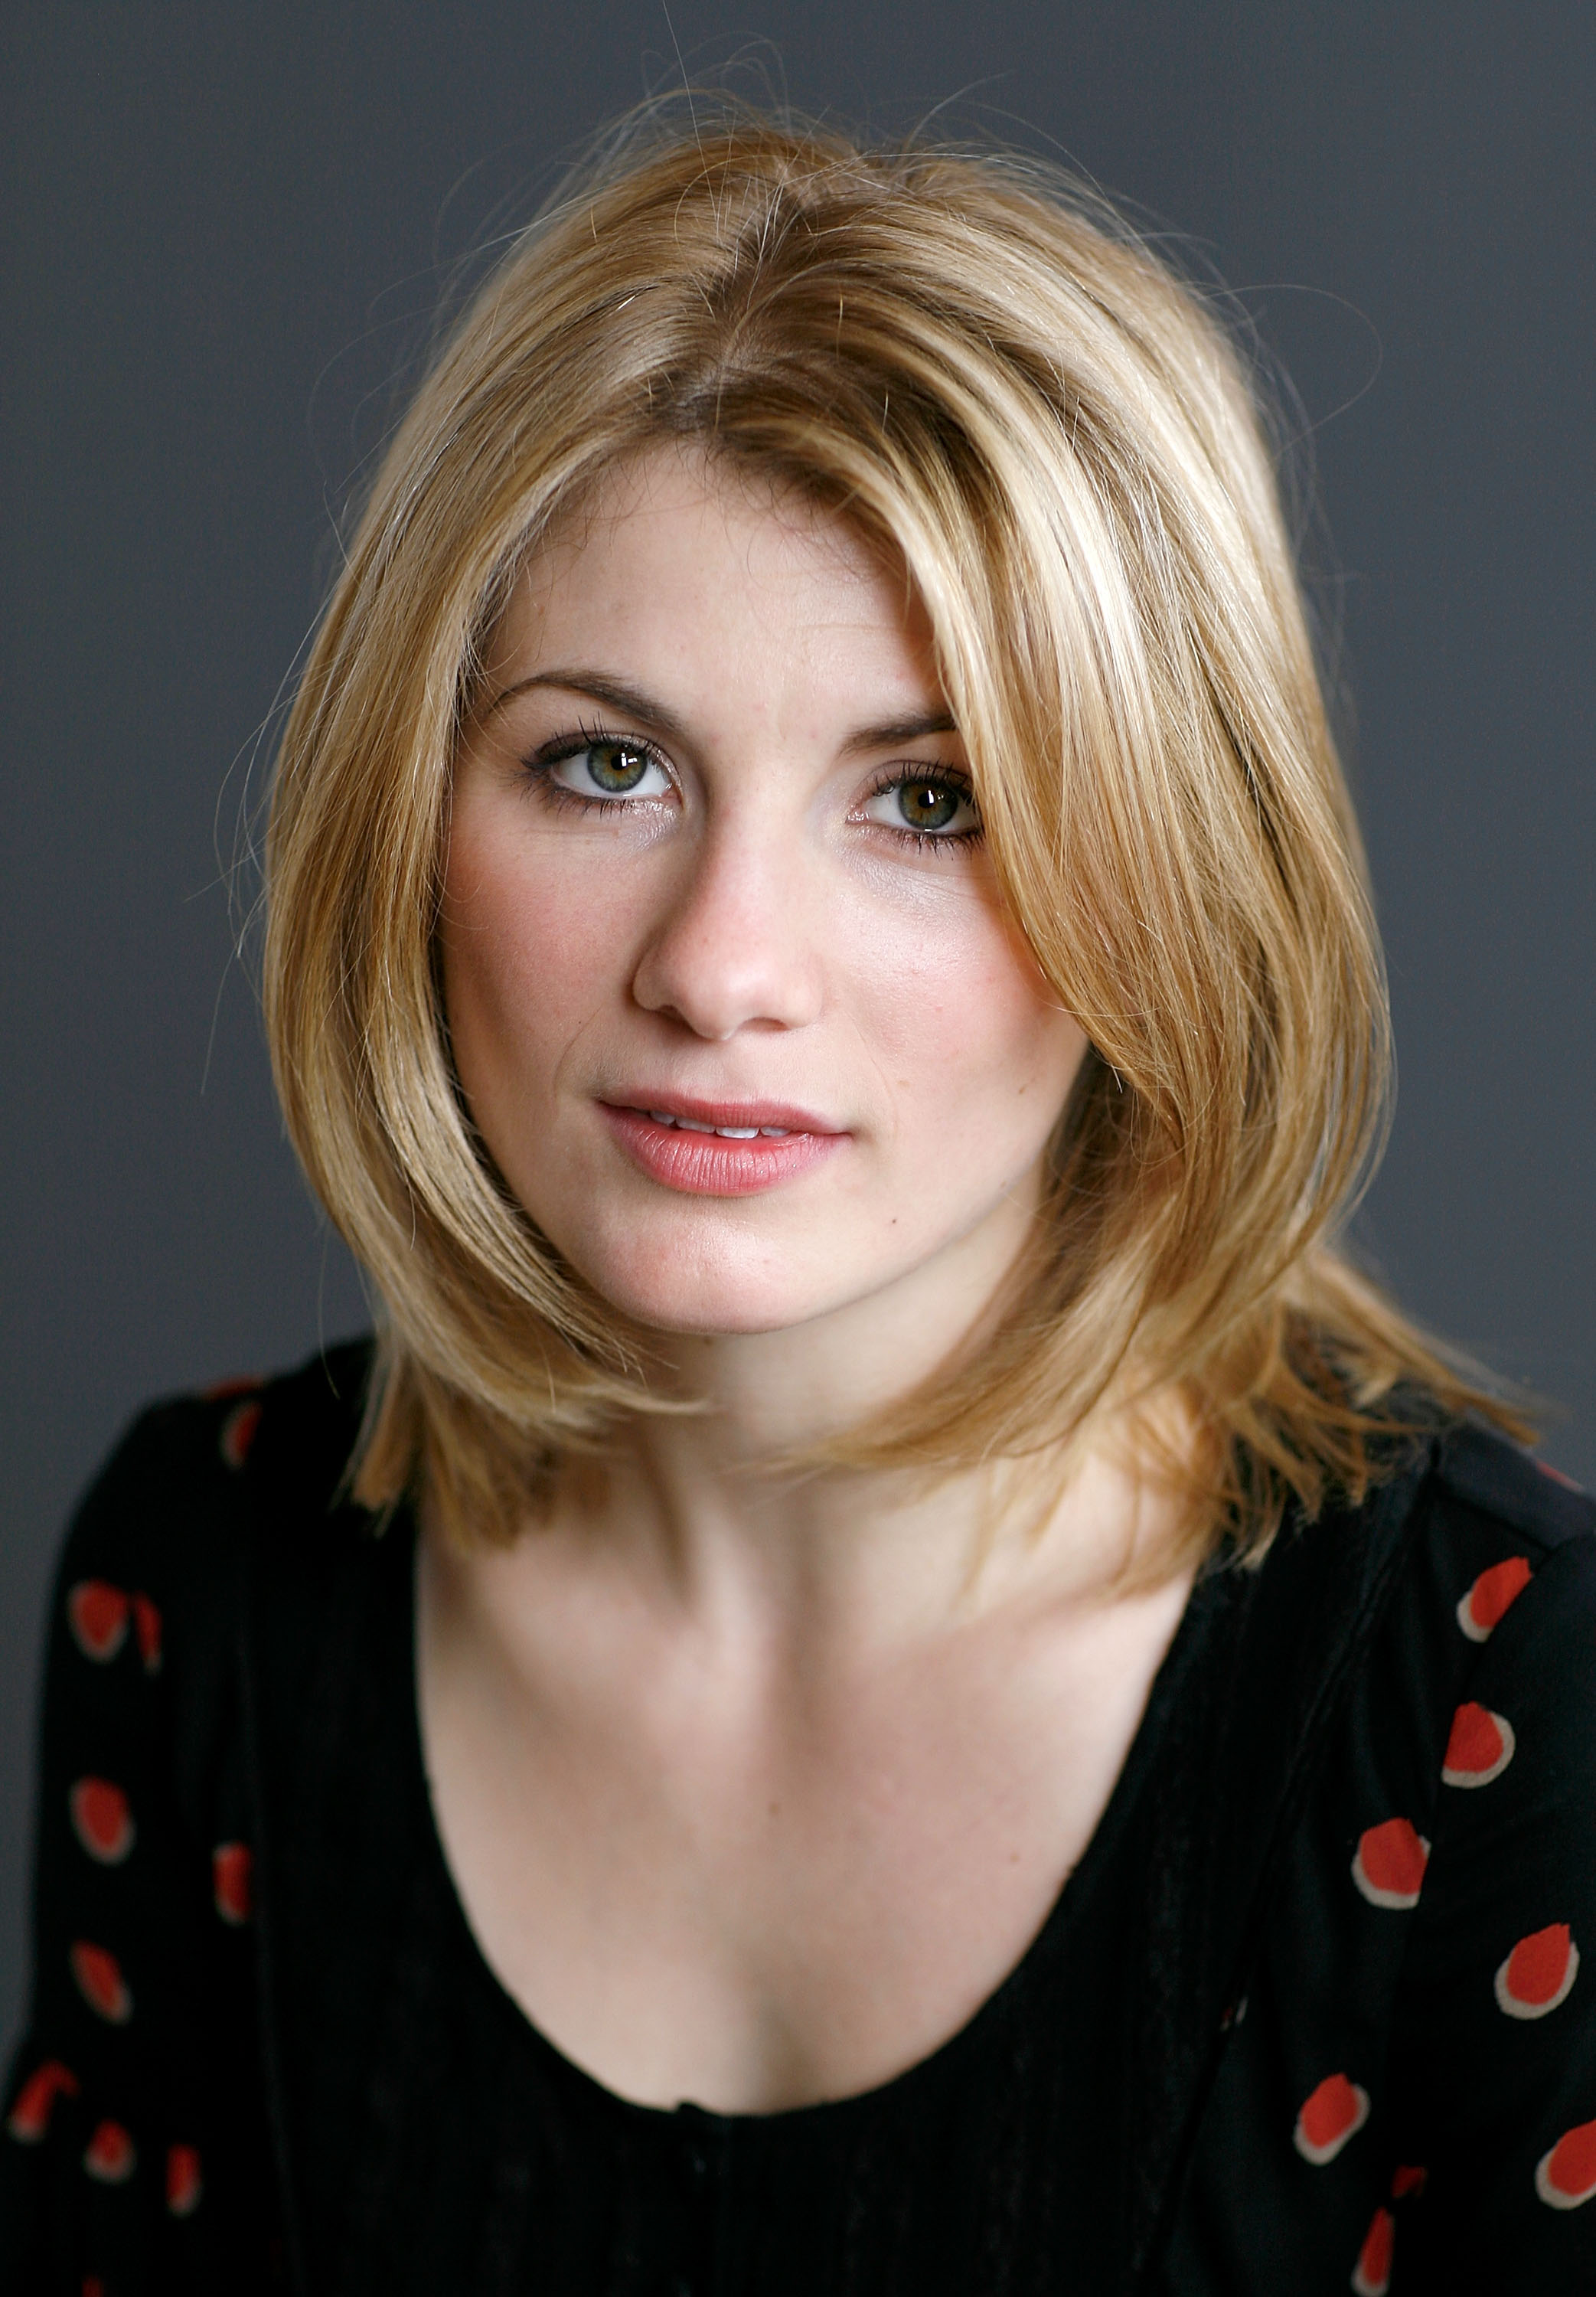 60+ Hot Pictures Of Jodie Whittaker – 13th Doctor Who | Best Of Comic Books